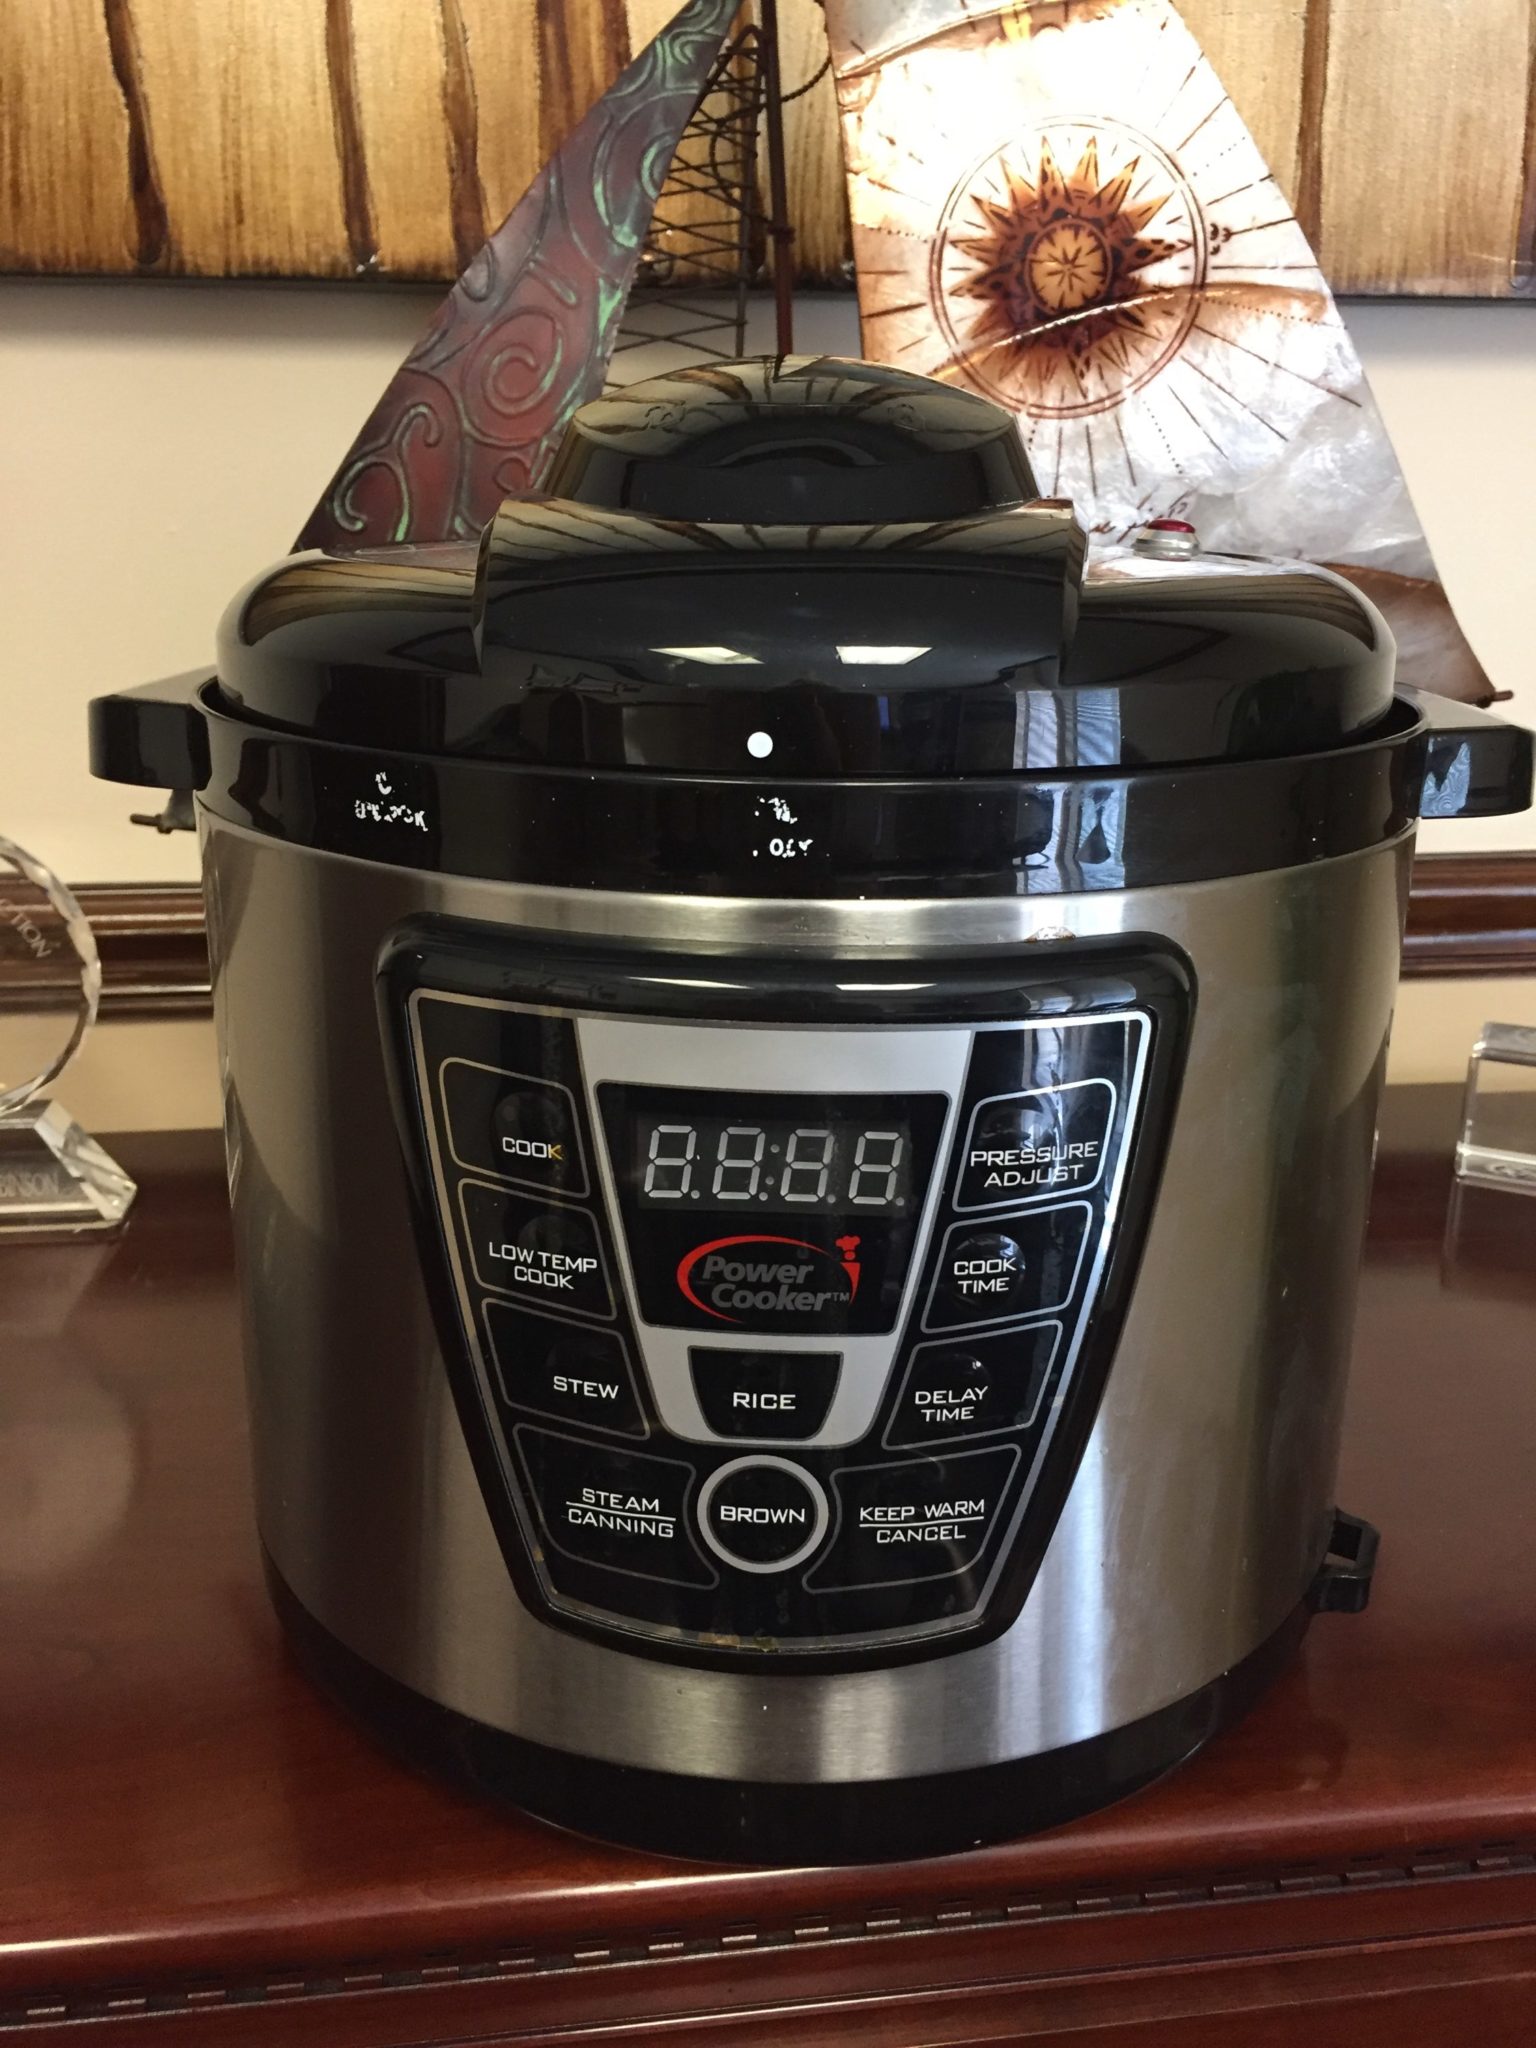 Dangerous Pressure Cookers Causing Severe Injuries - Searcy Law